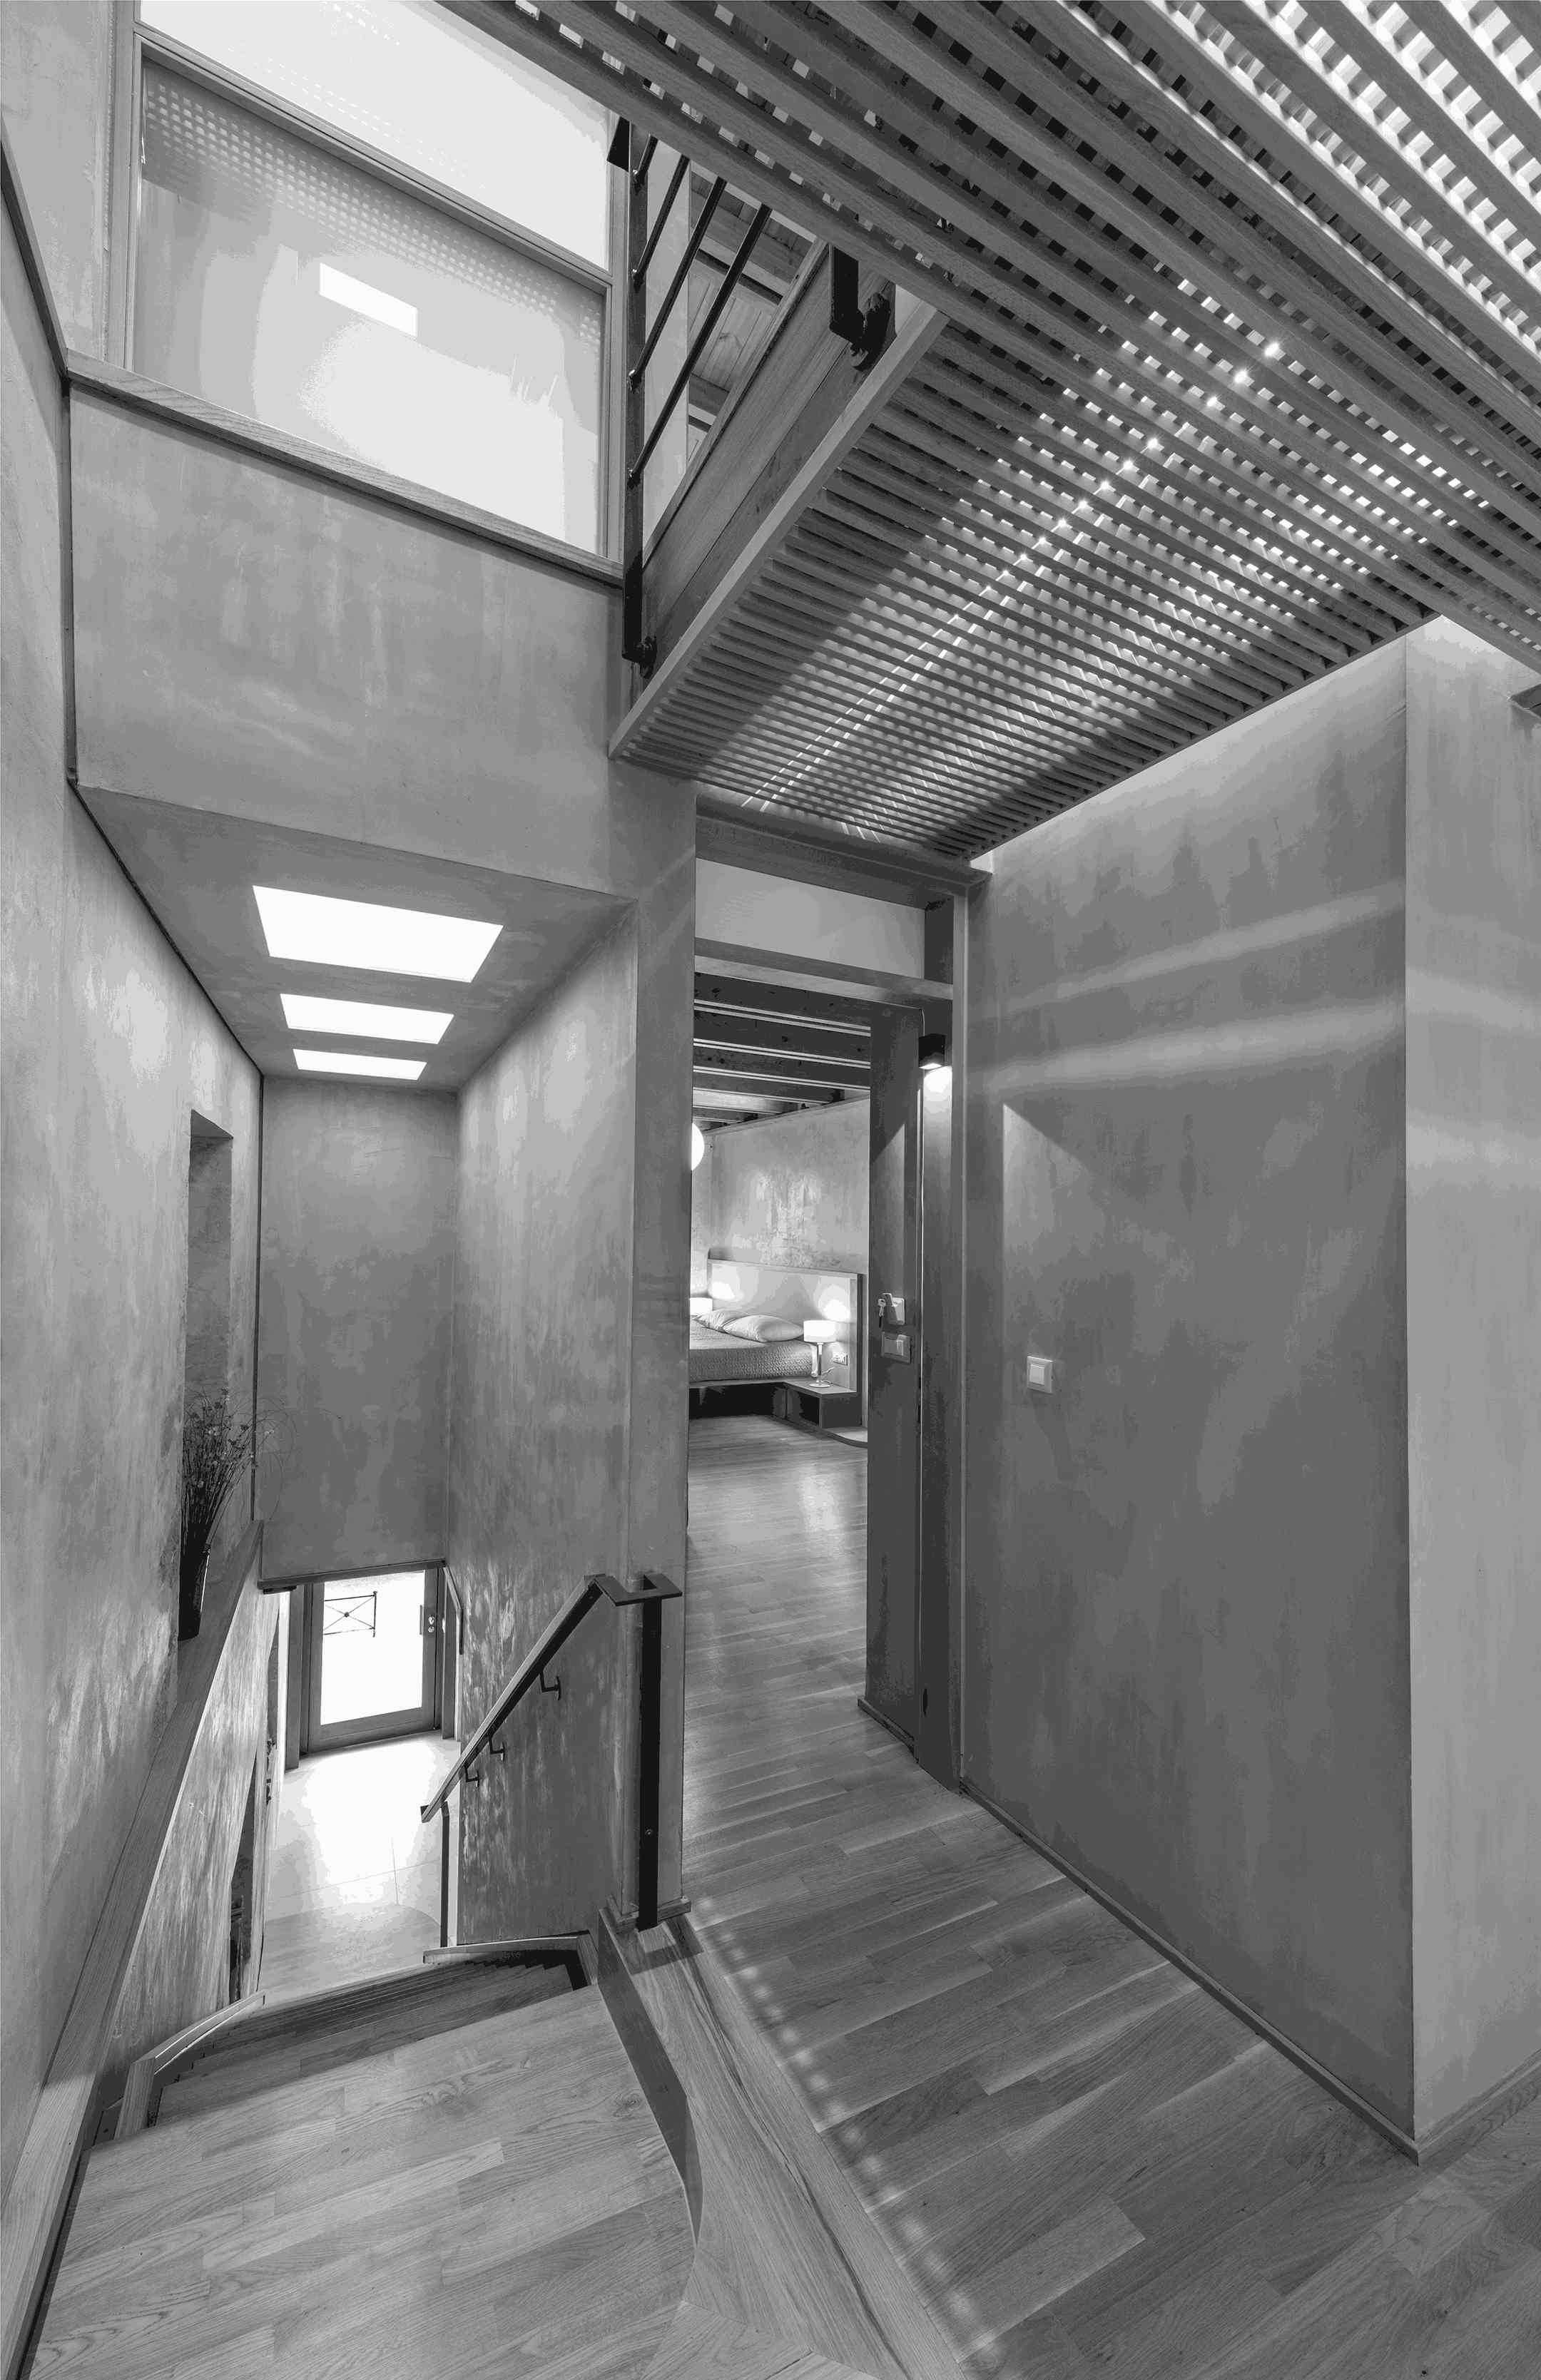 Rehabilitation of Two Buildings and Reuse as a Small Hotel in Chania, Crete by I.K. Verikakis Architectural Office No4